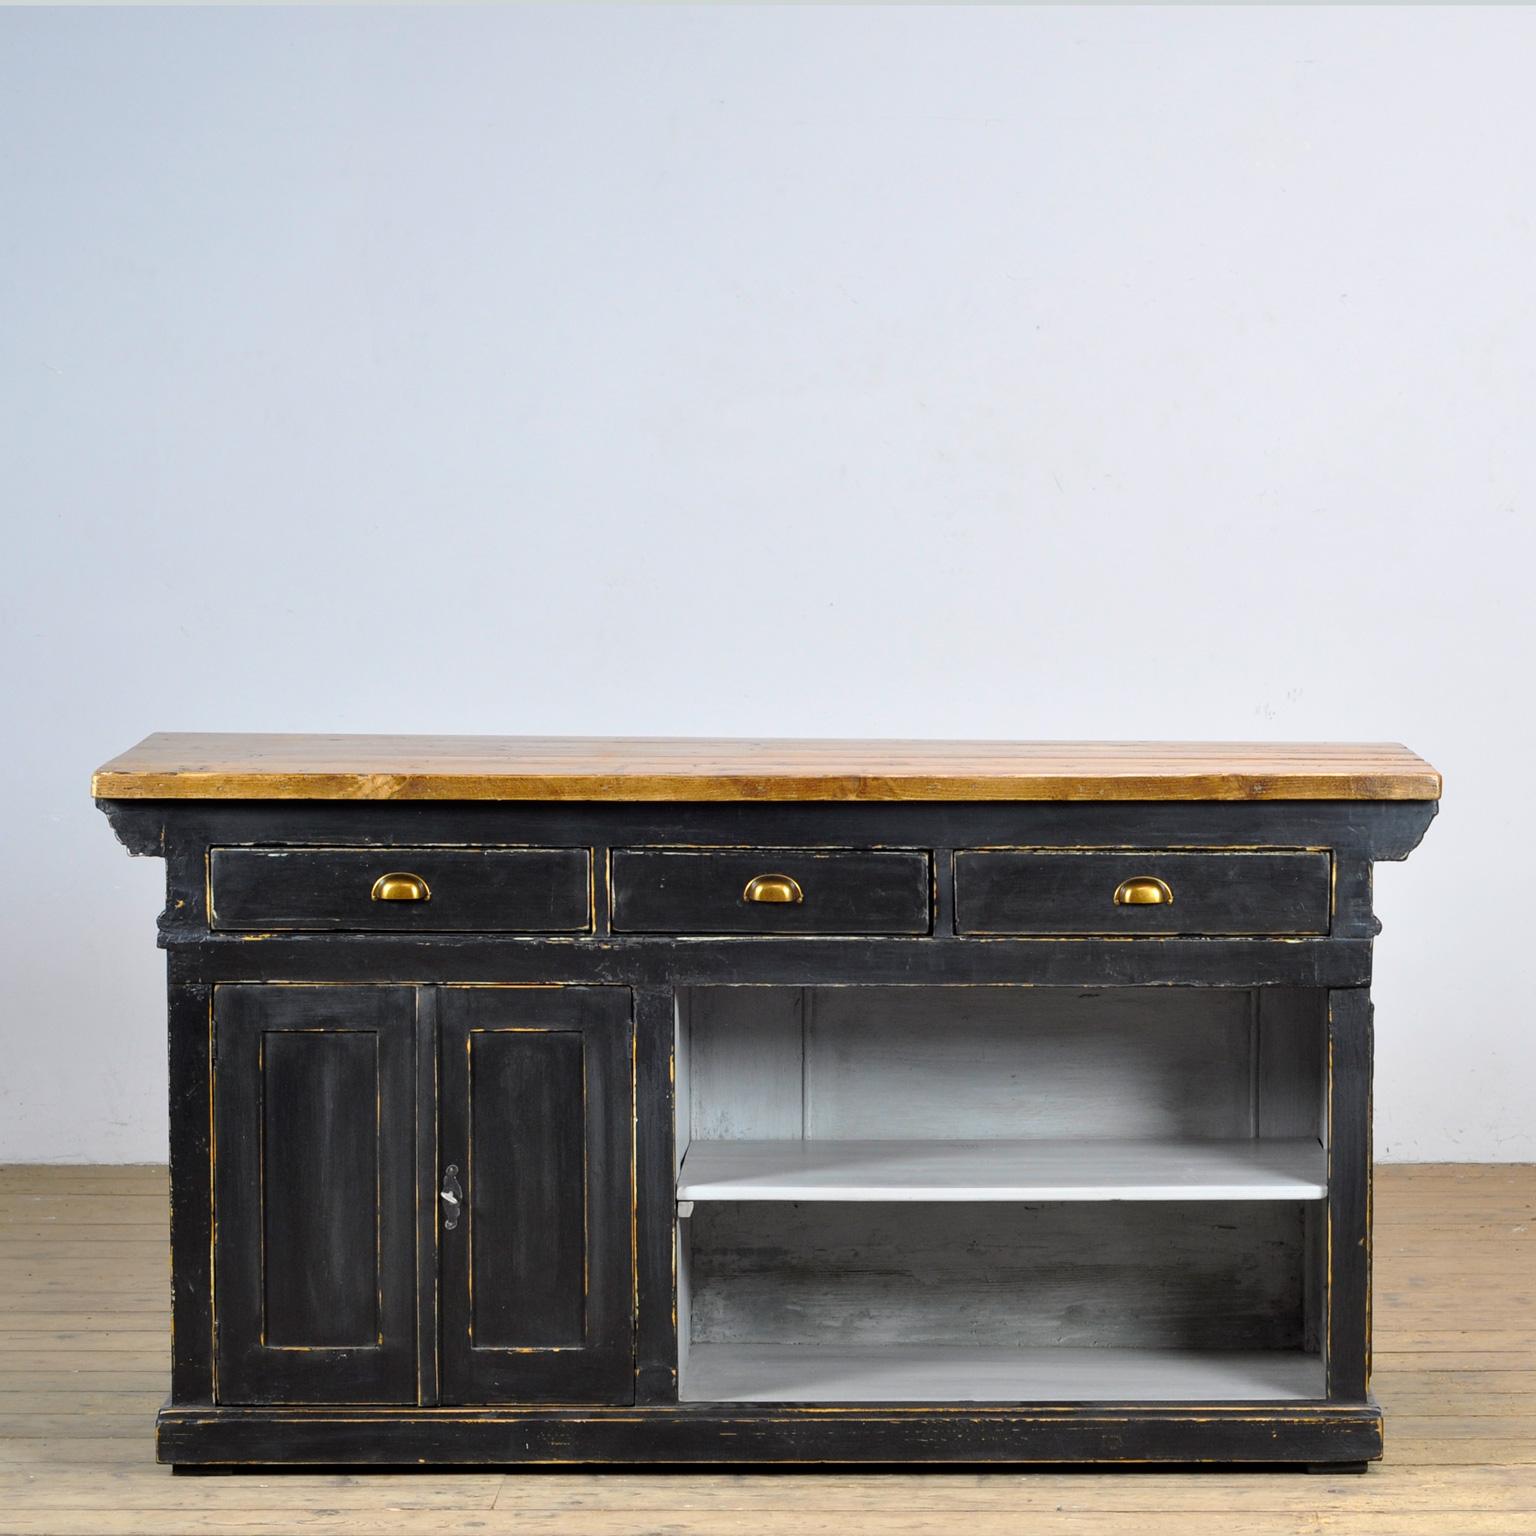 Pine freestanding shop counter from around 1920. The counter has three drawers on one side with storage space underneath.